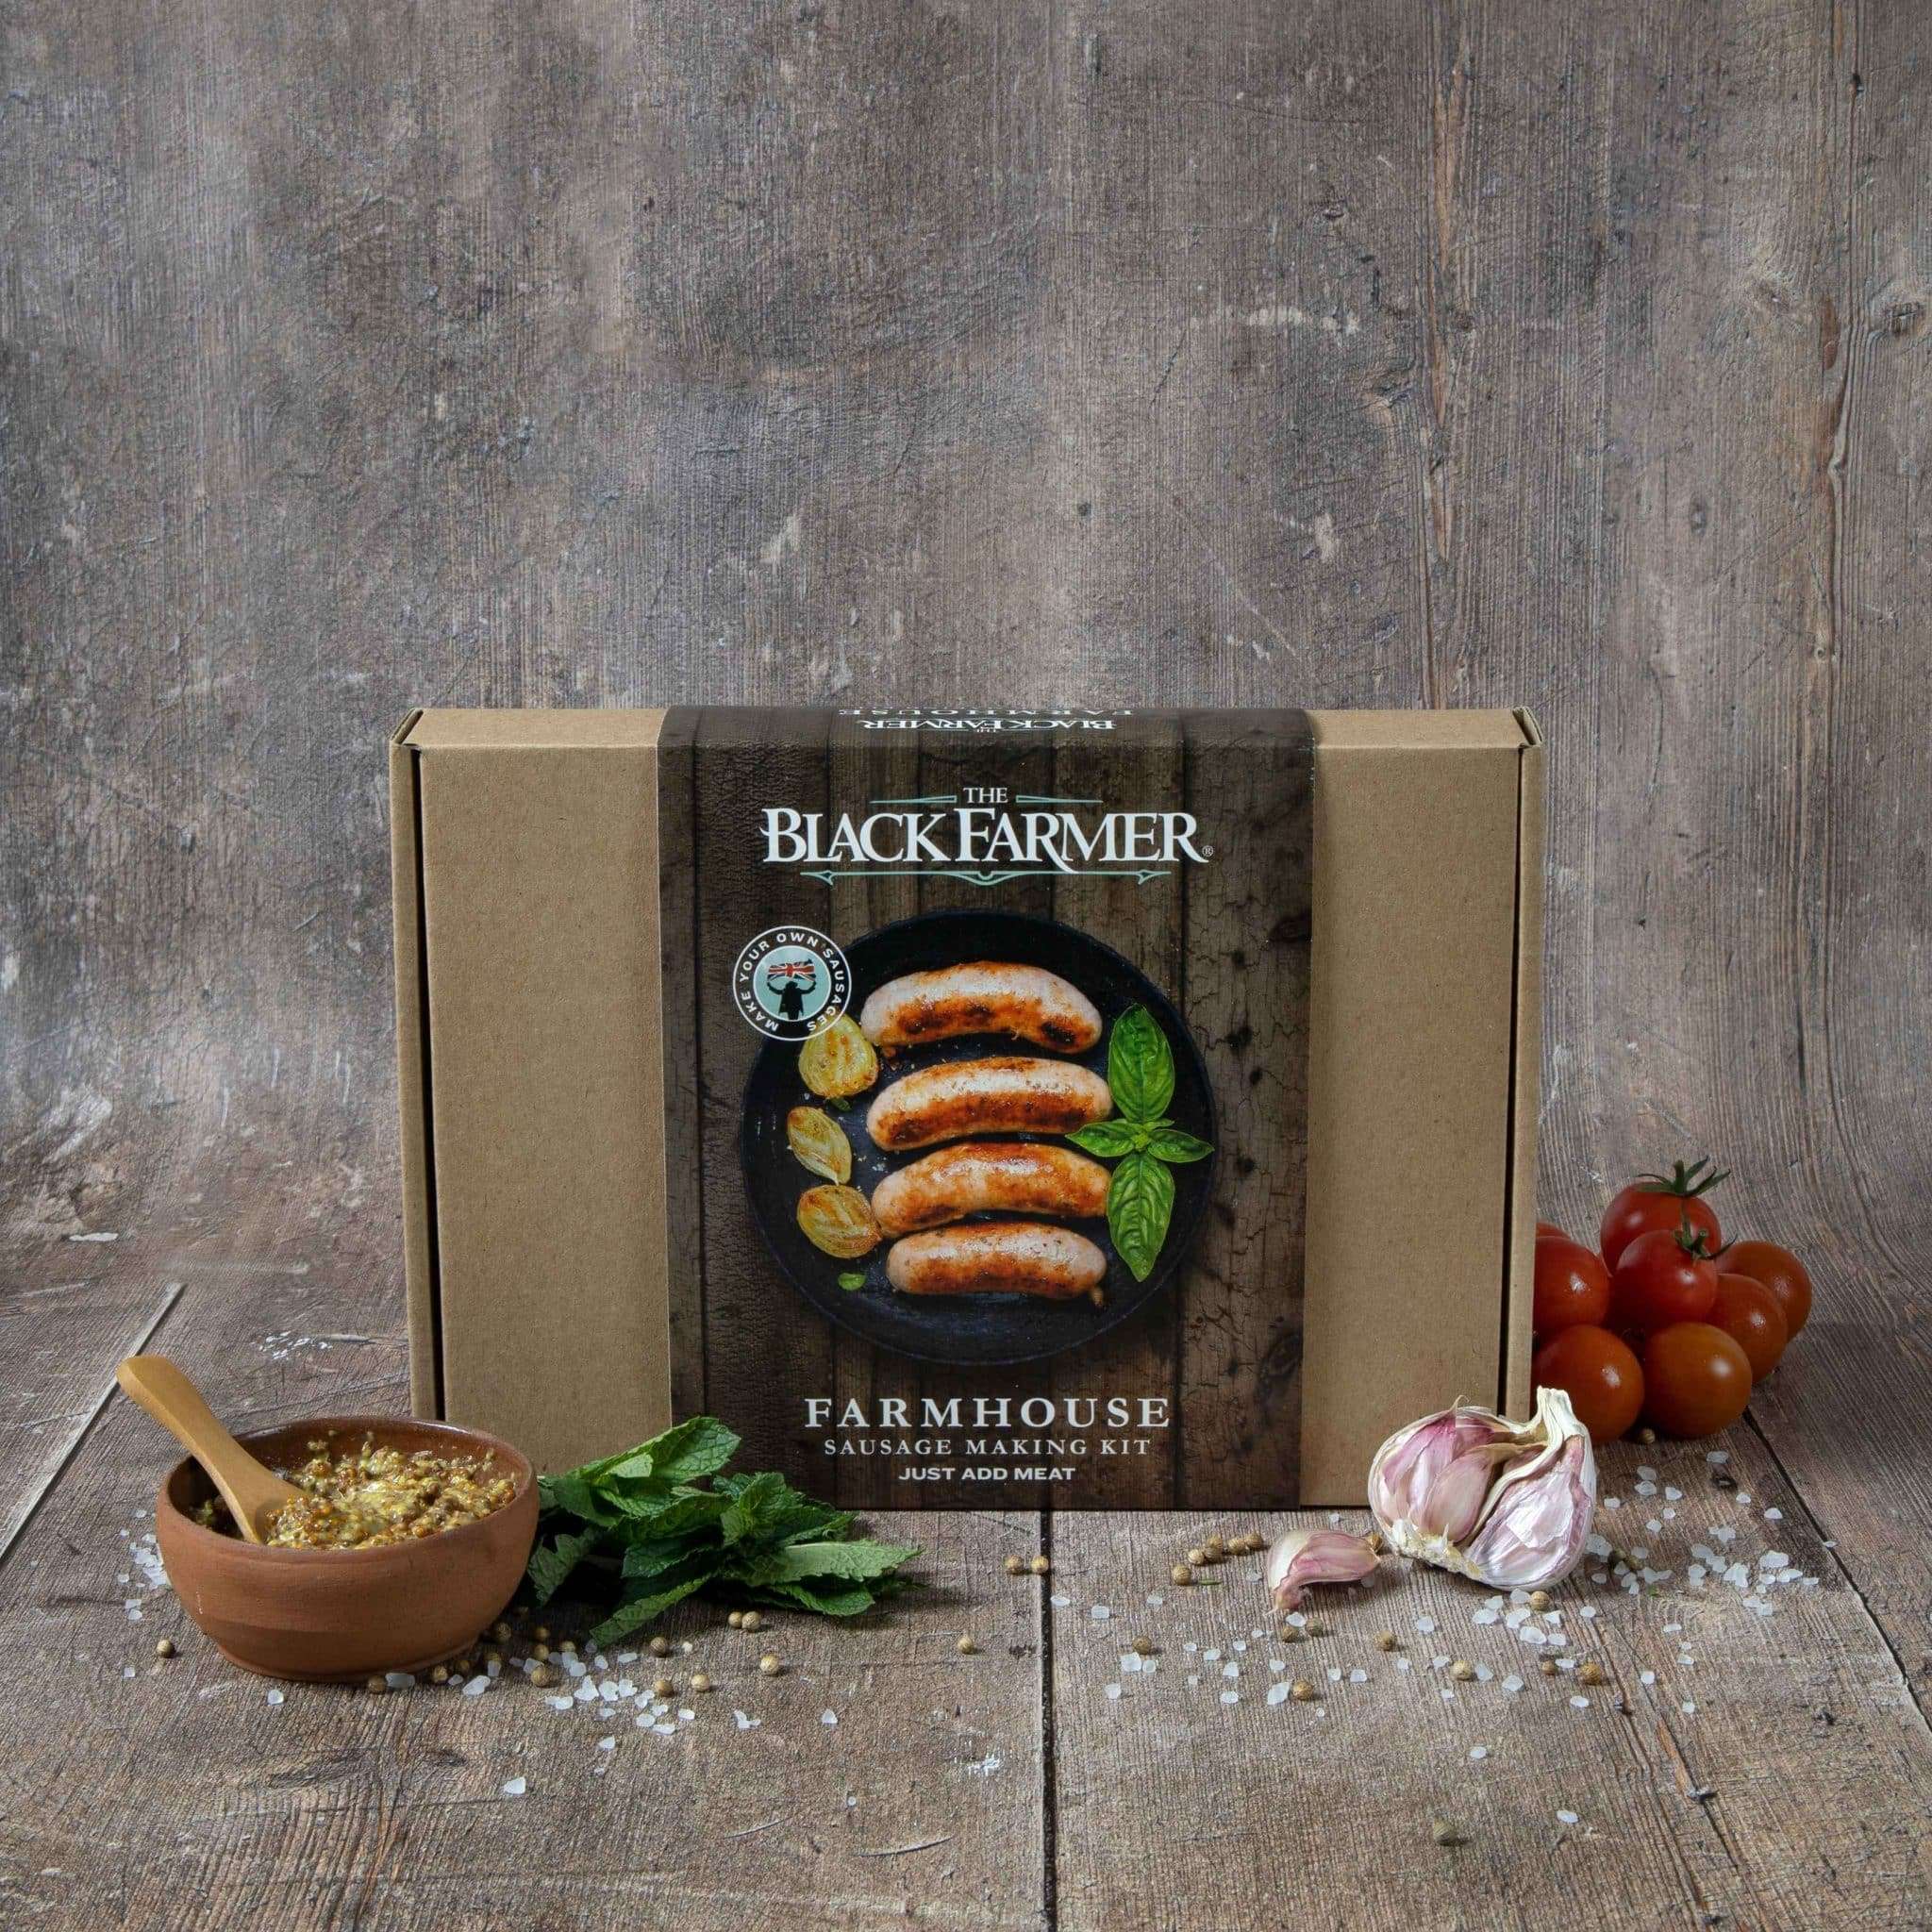 Farmhouse sausage kit tabletop.psd scaled Make your own sausages! This Farmhouse sausage making kit has everything you need to make your own sausages from scratch, simply add your pork meat. The perfect Christmas gift, or enjoy the fun of making your own sausages at home!